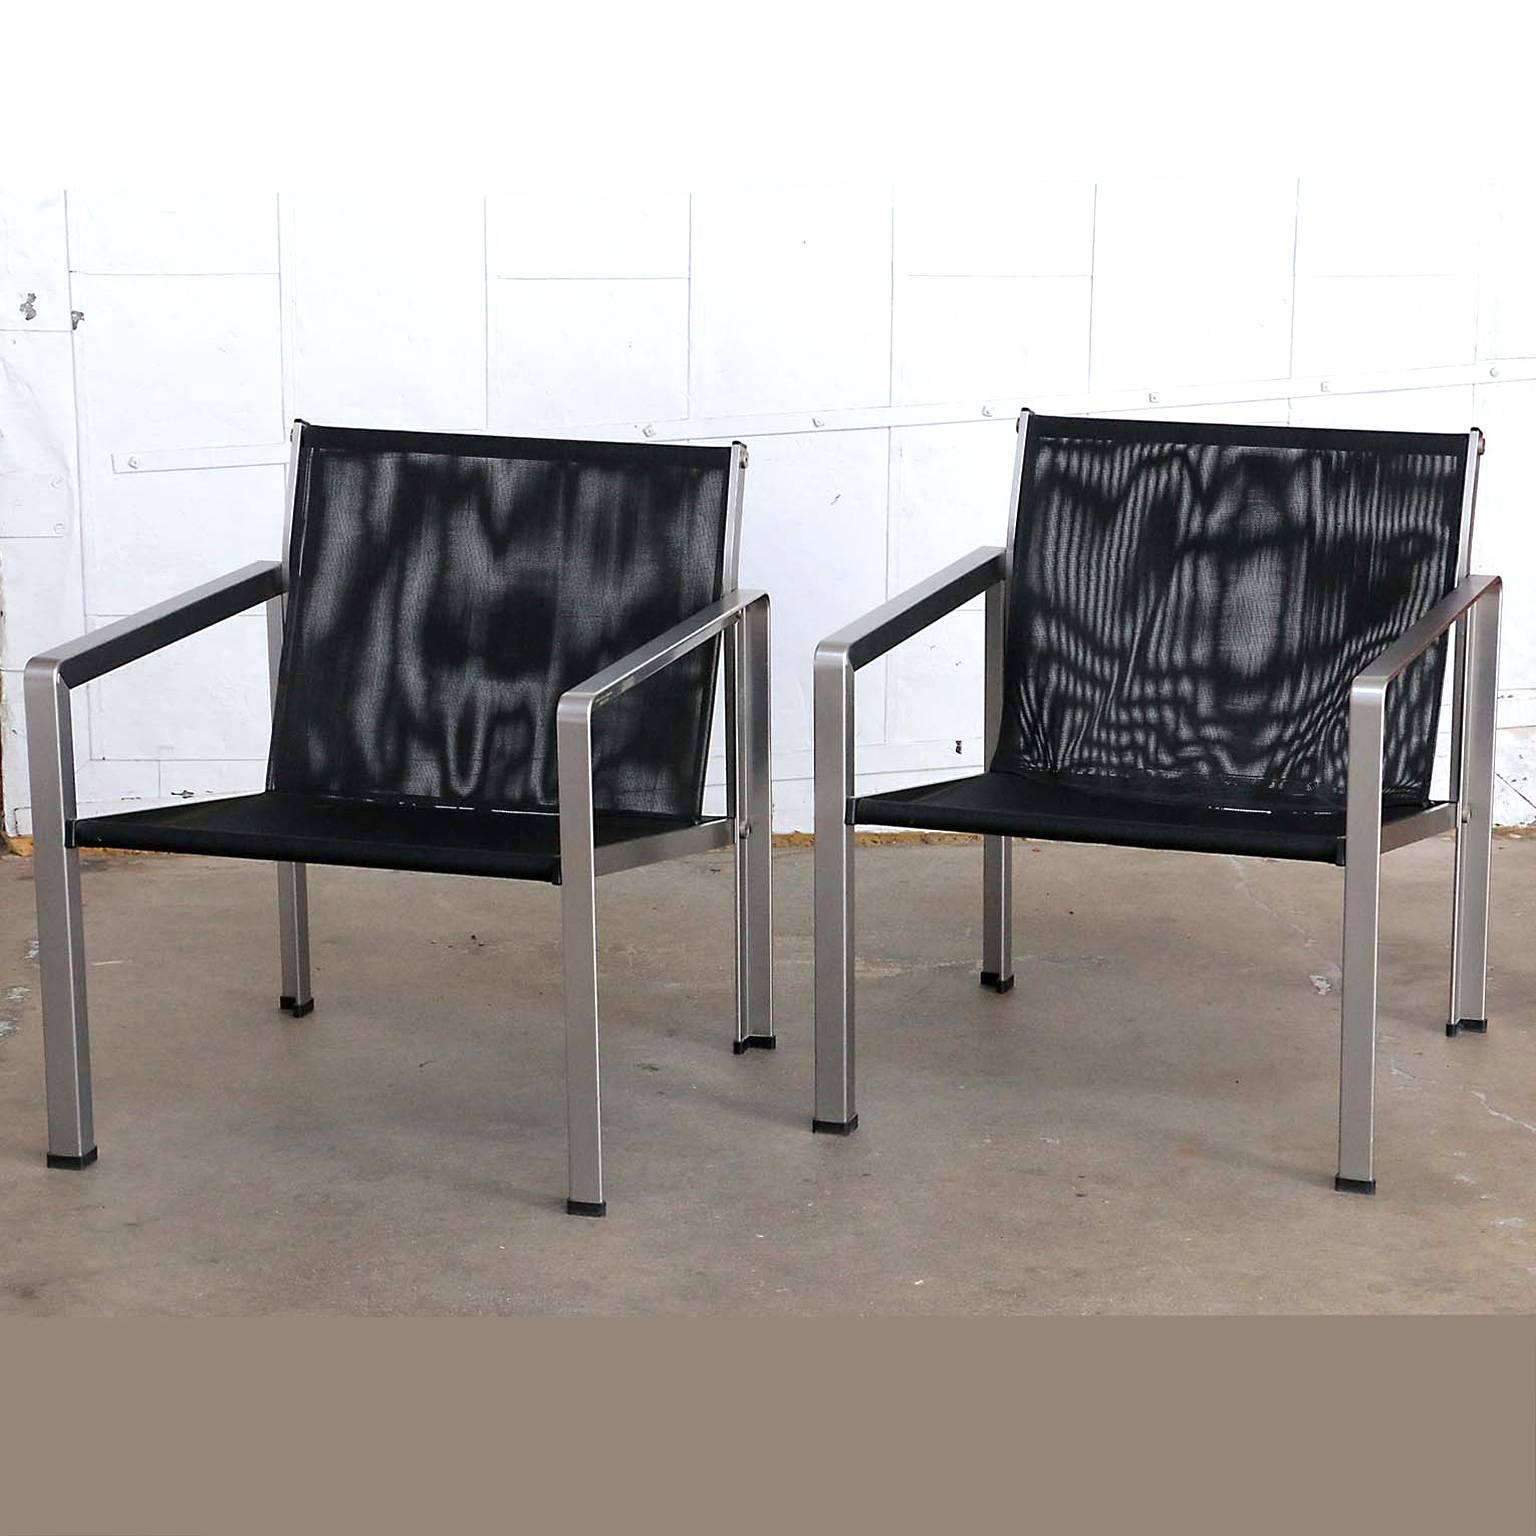 Rare pair of Giuseppe Raimondi design aluminum modernist lounge or cube chairs made in Italy. Each constructed from flat-bar aircraft style aluminum frames with a brushed finish. Upholstered with fine mesh slings suspended from round bars. Each